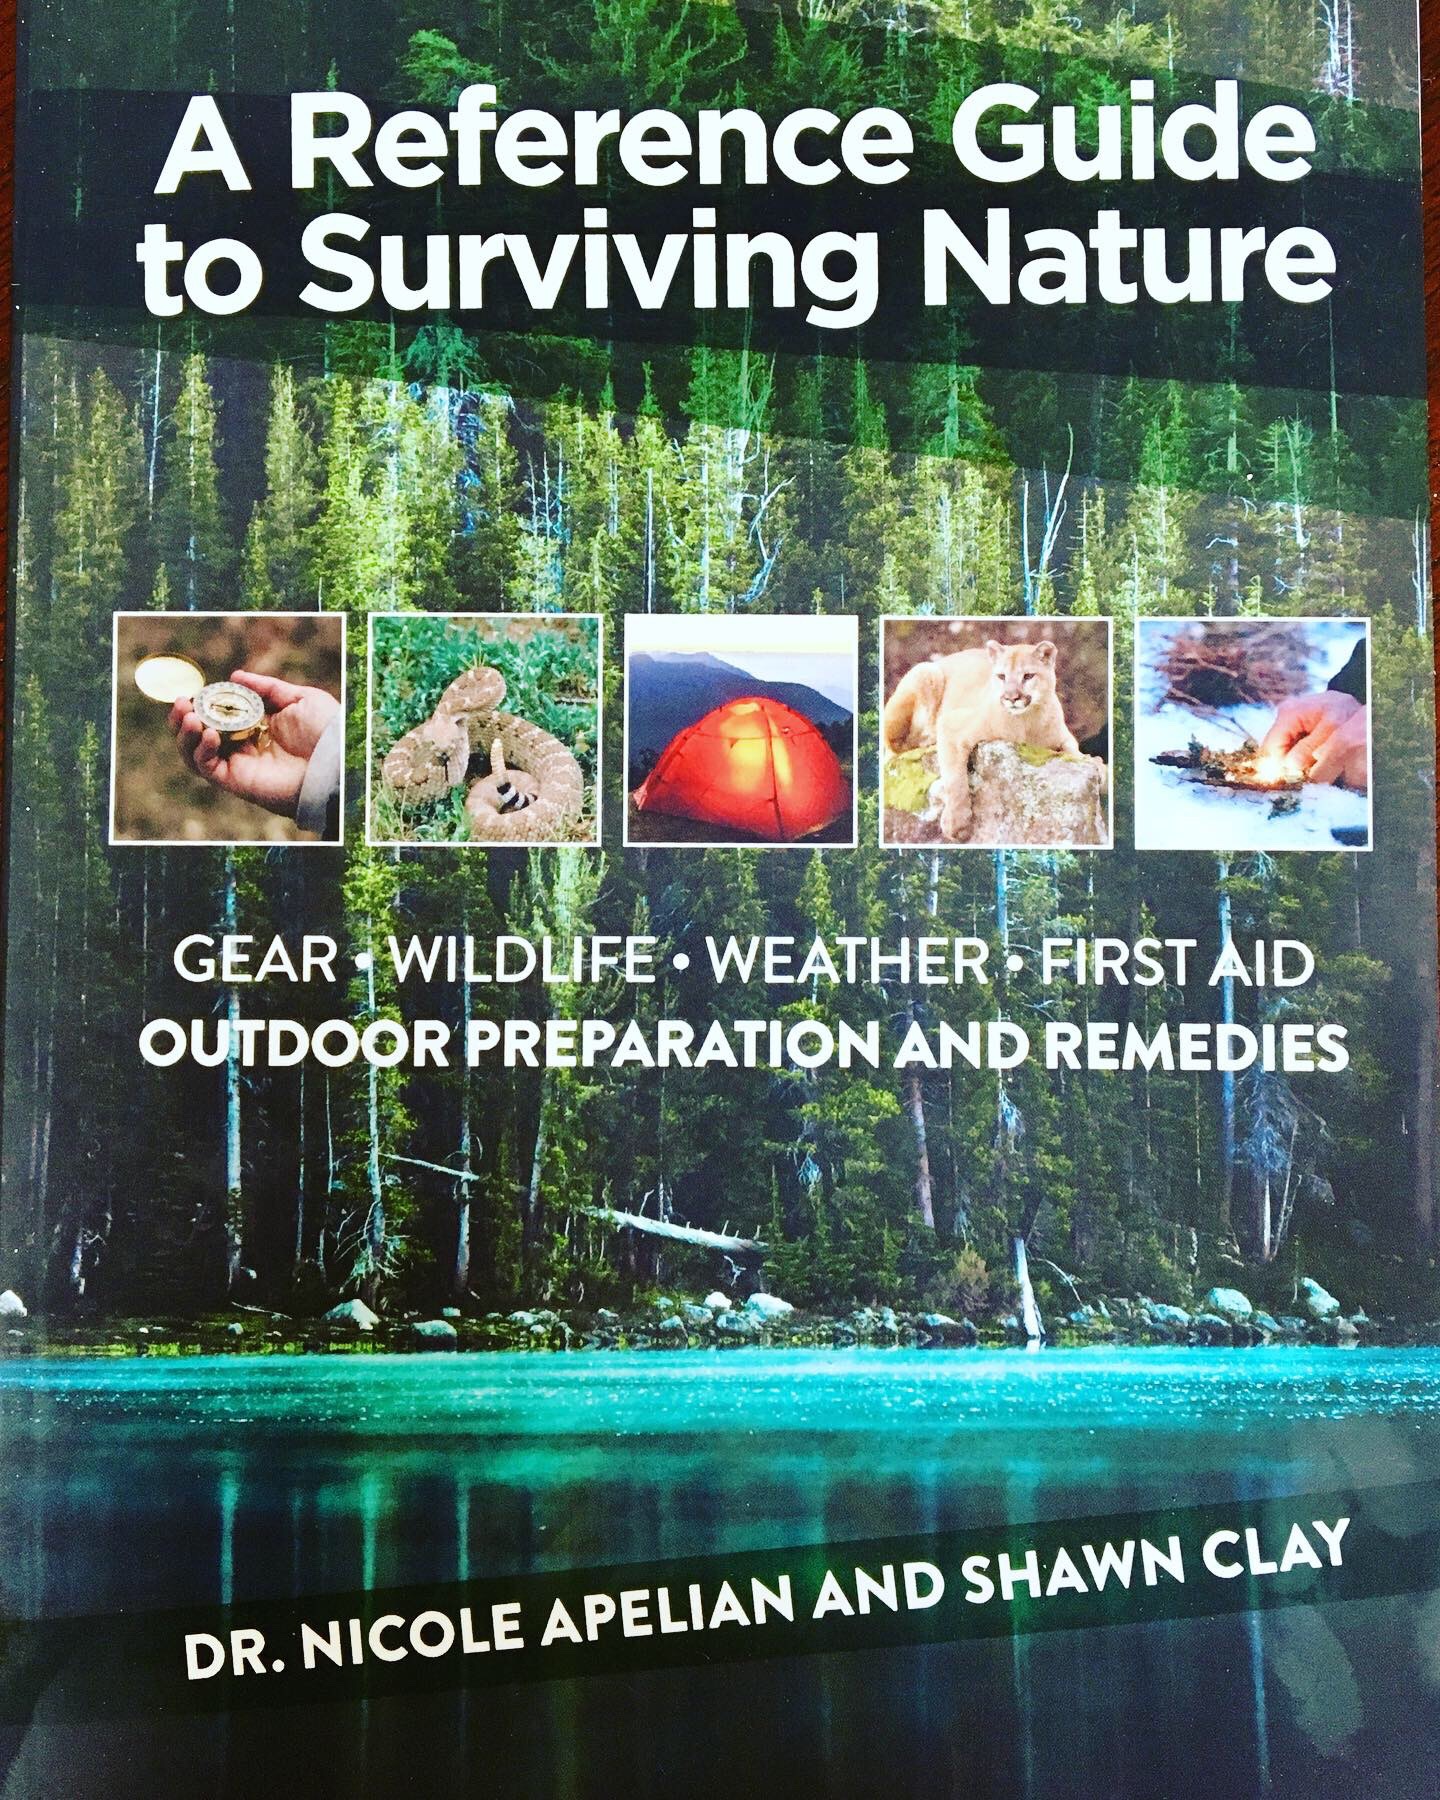 Now on Amazon: A Reference Guide to Surviving Nature by Nicole Apelian